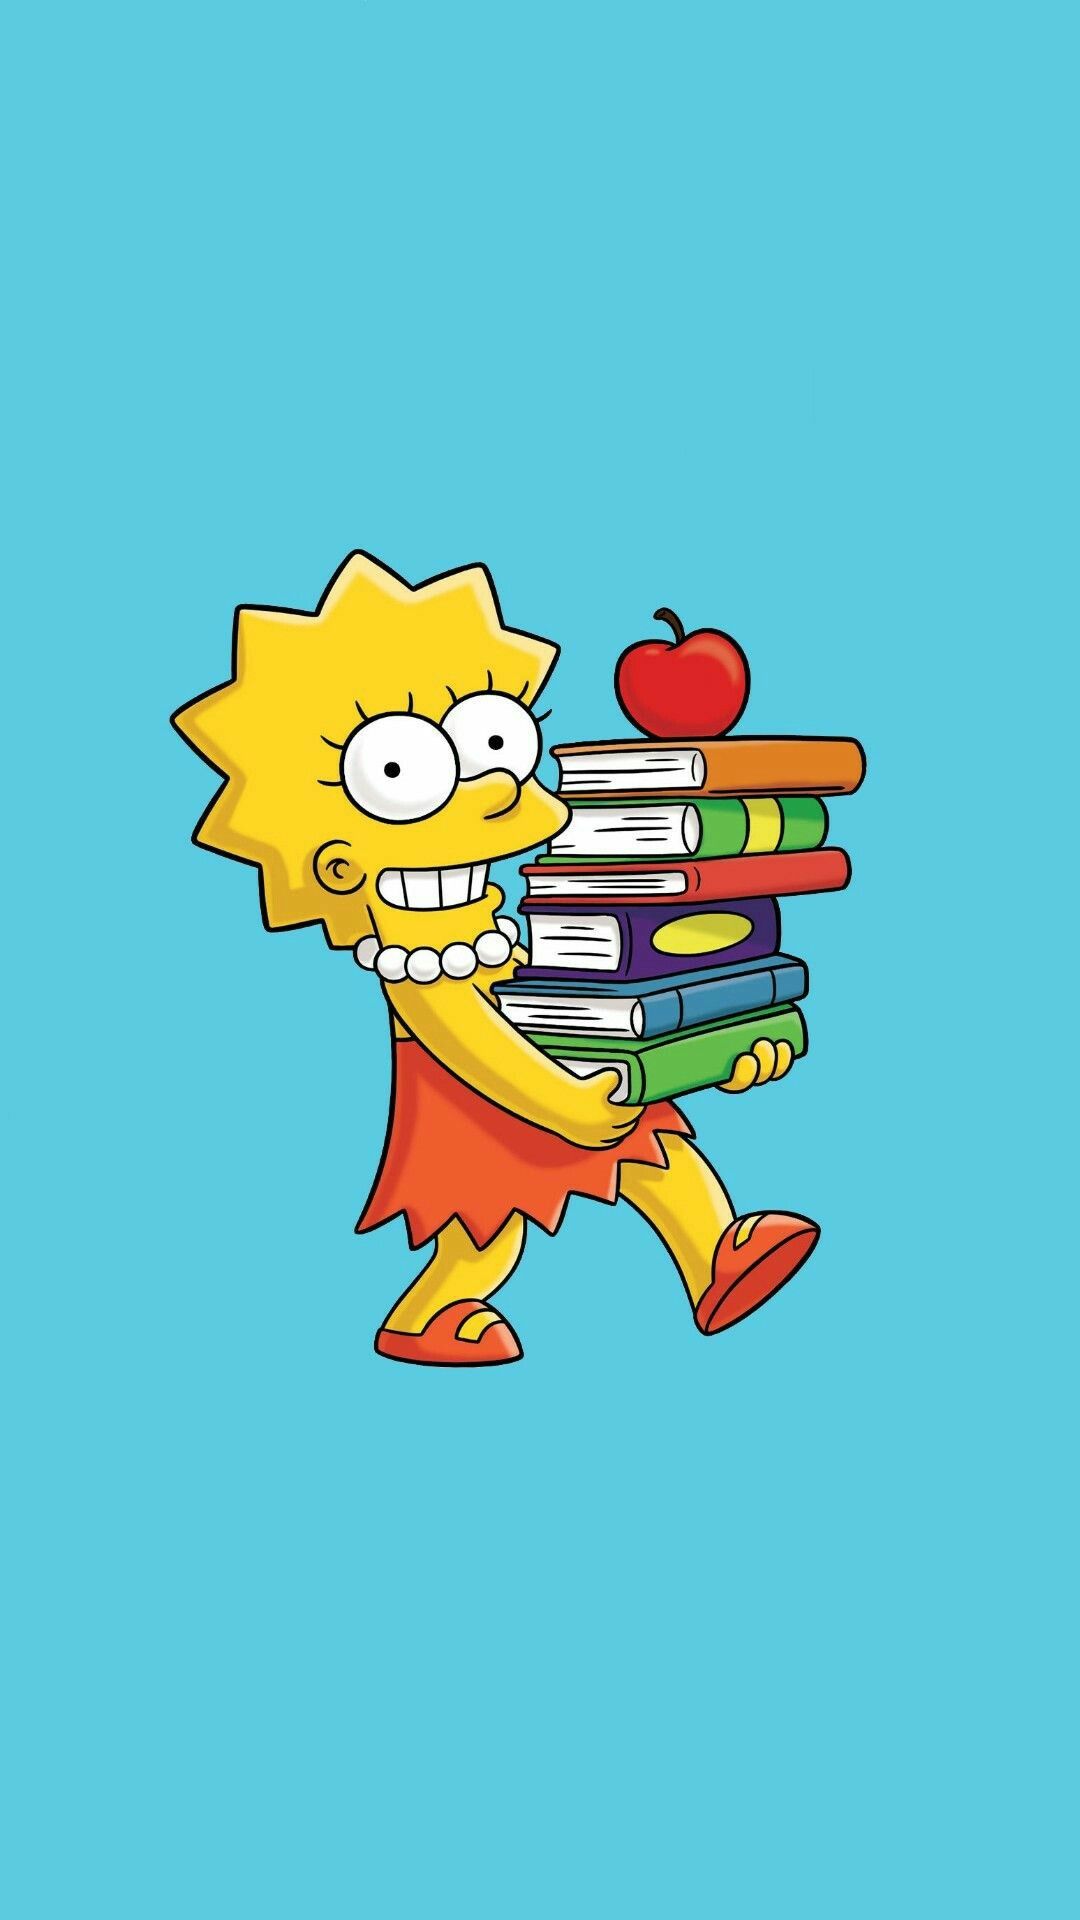 Lisa Simpson wallpaper for iPhone and Android phone. - The Simpsons, Lisa Simpson